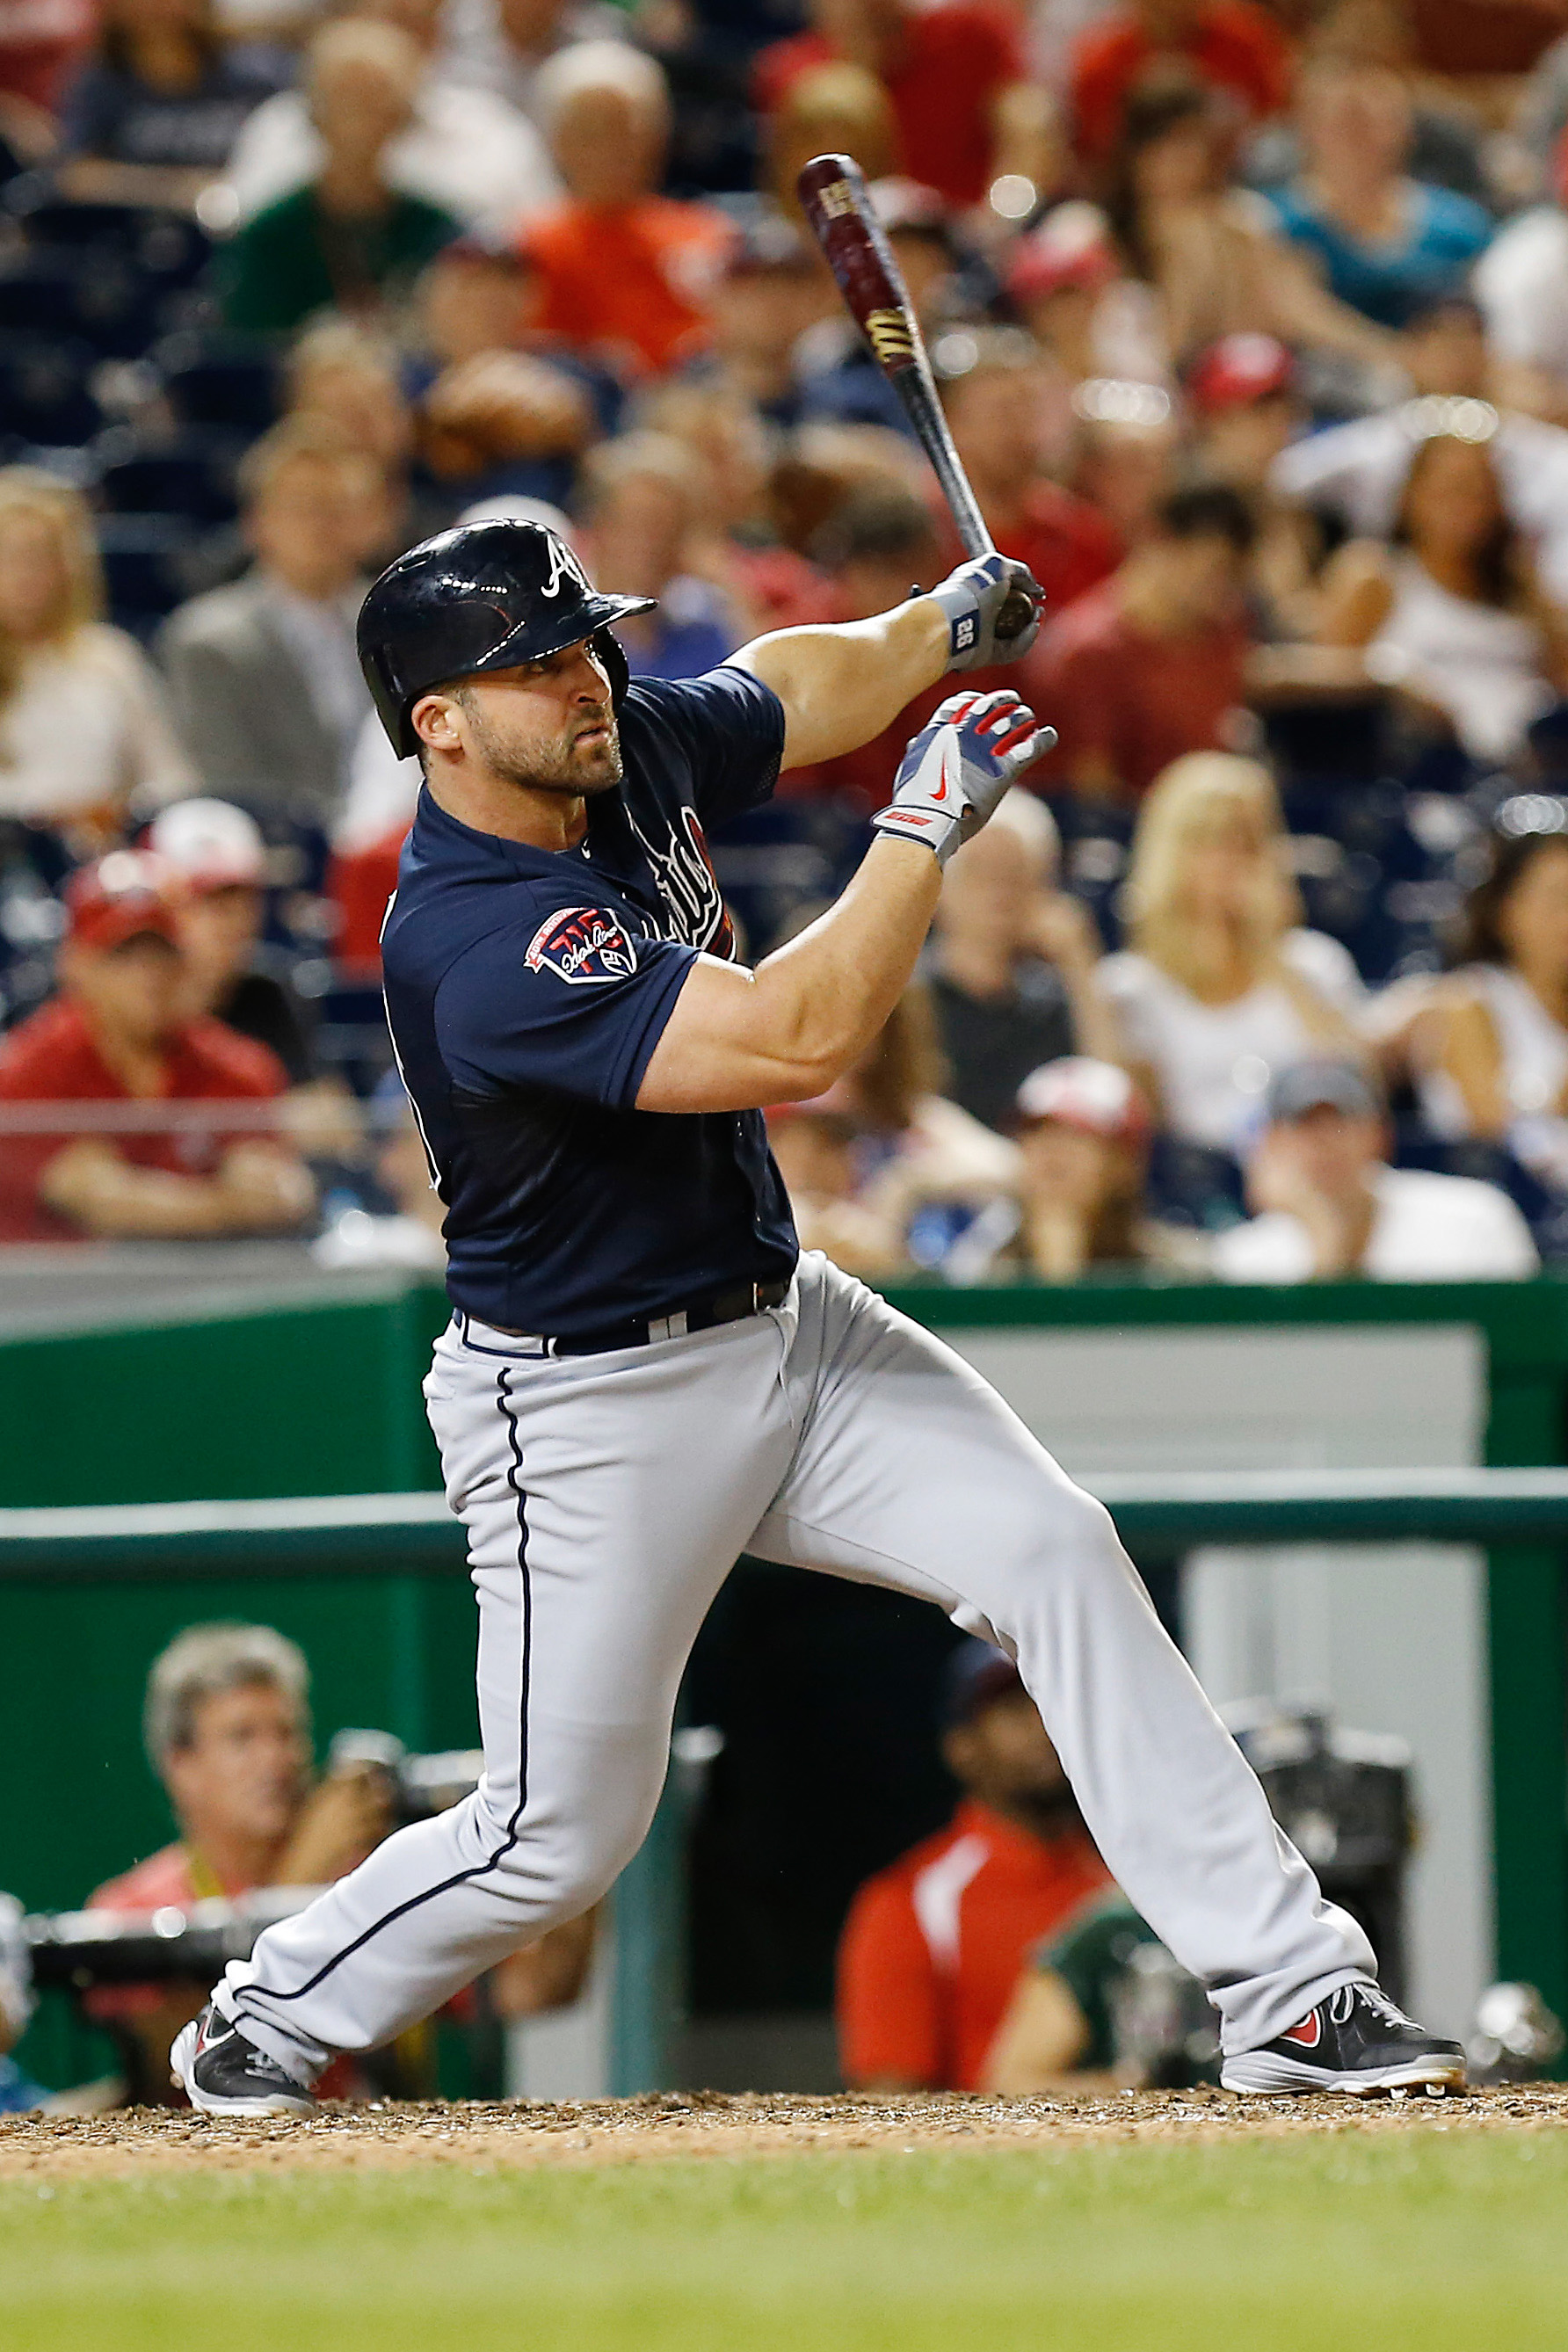 Dan Uggla goes from minors to two-time All-Star with Marlins